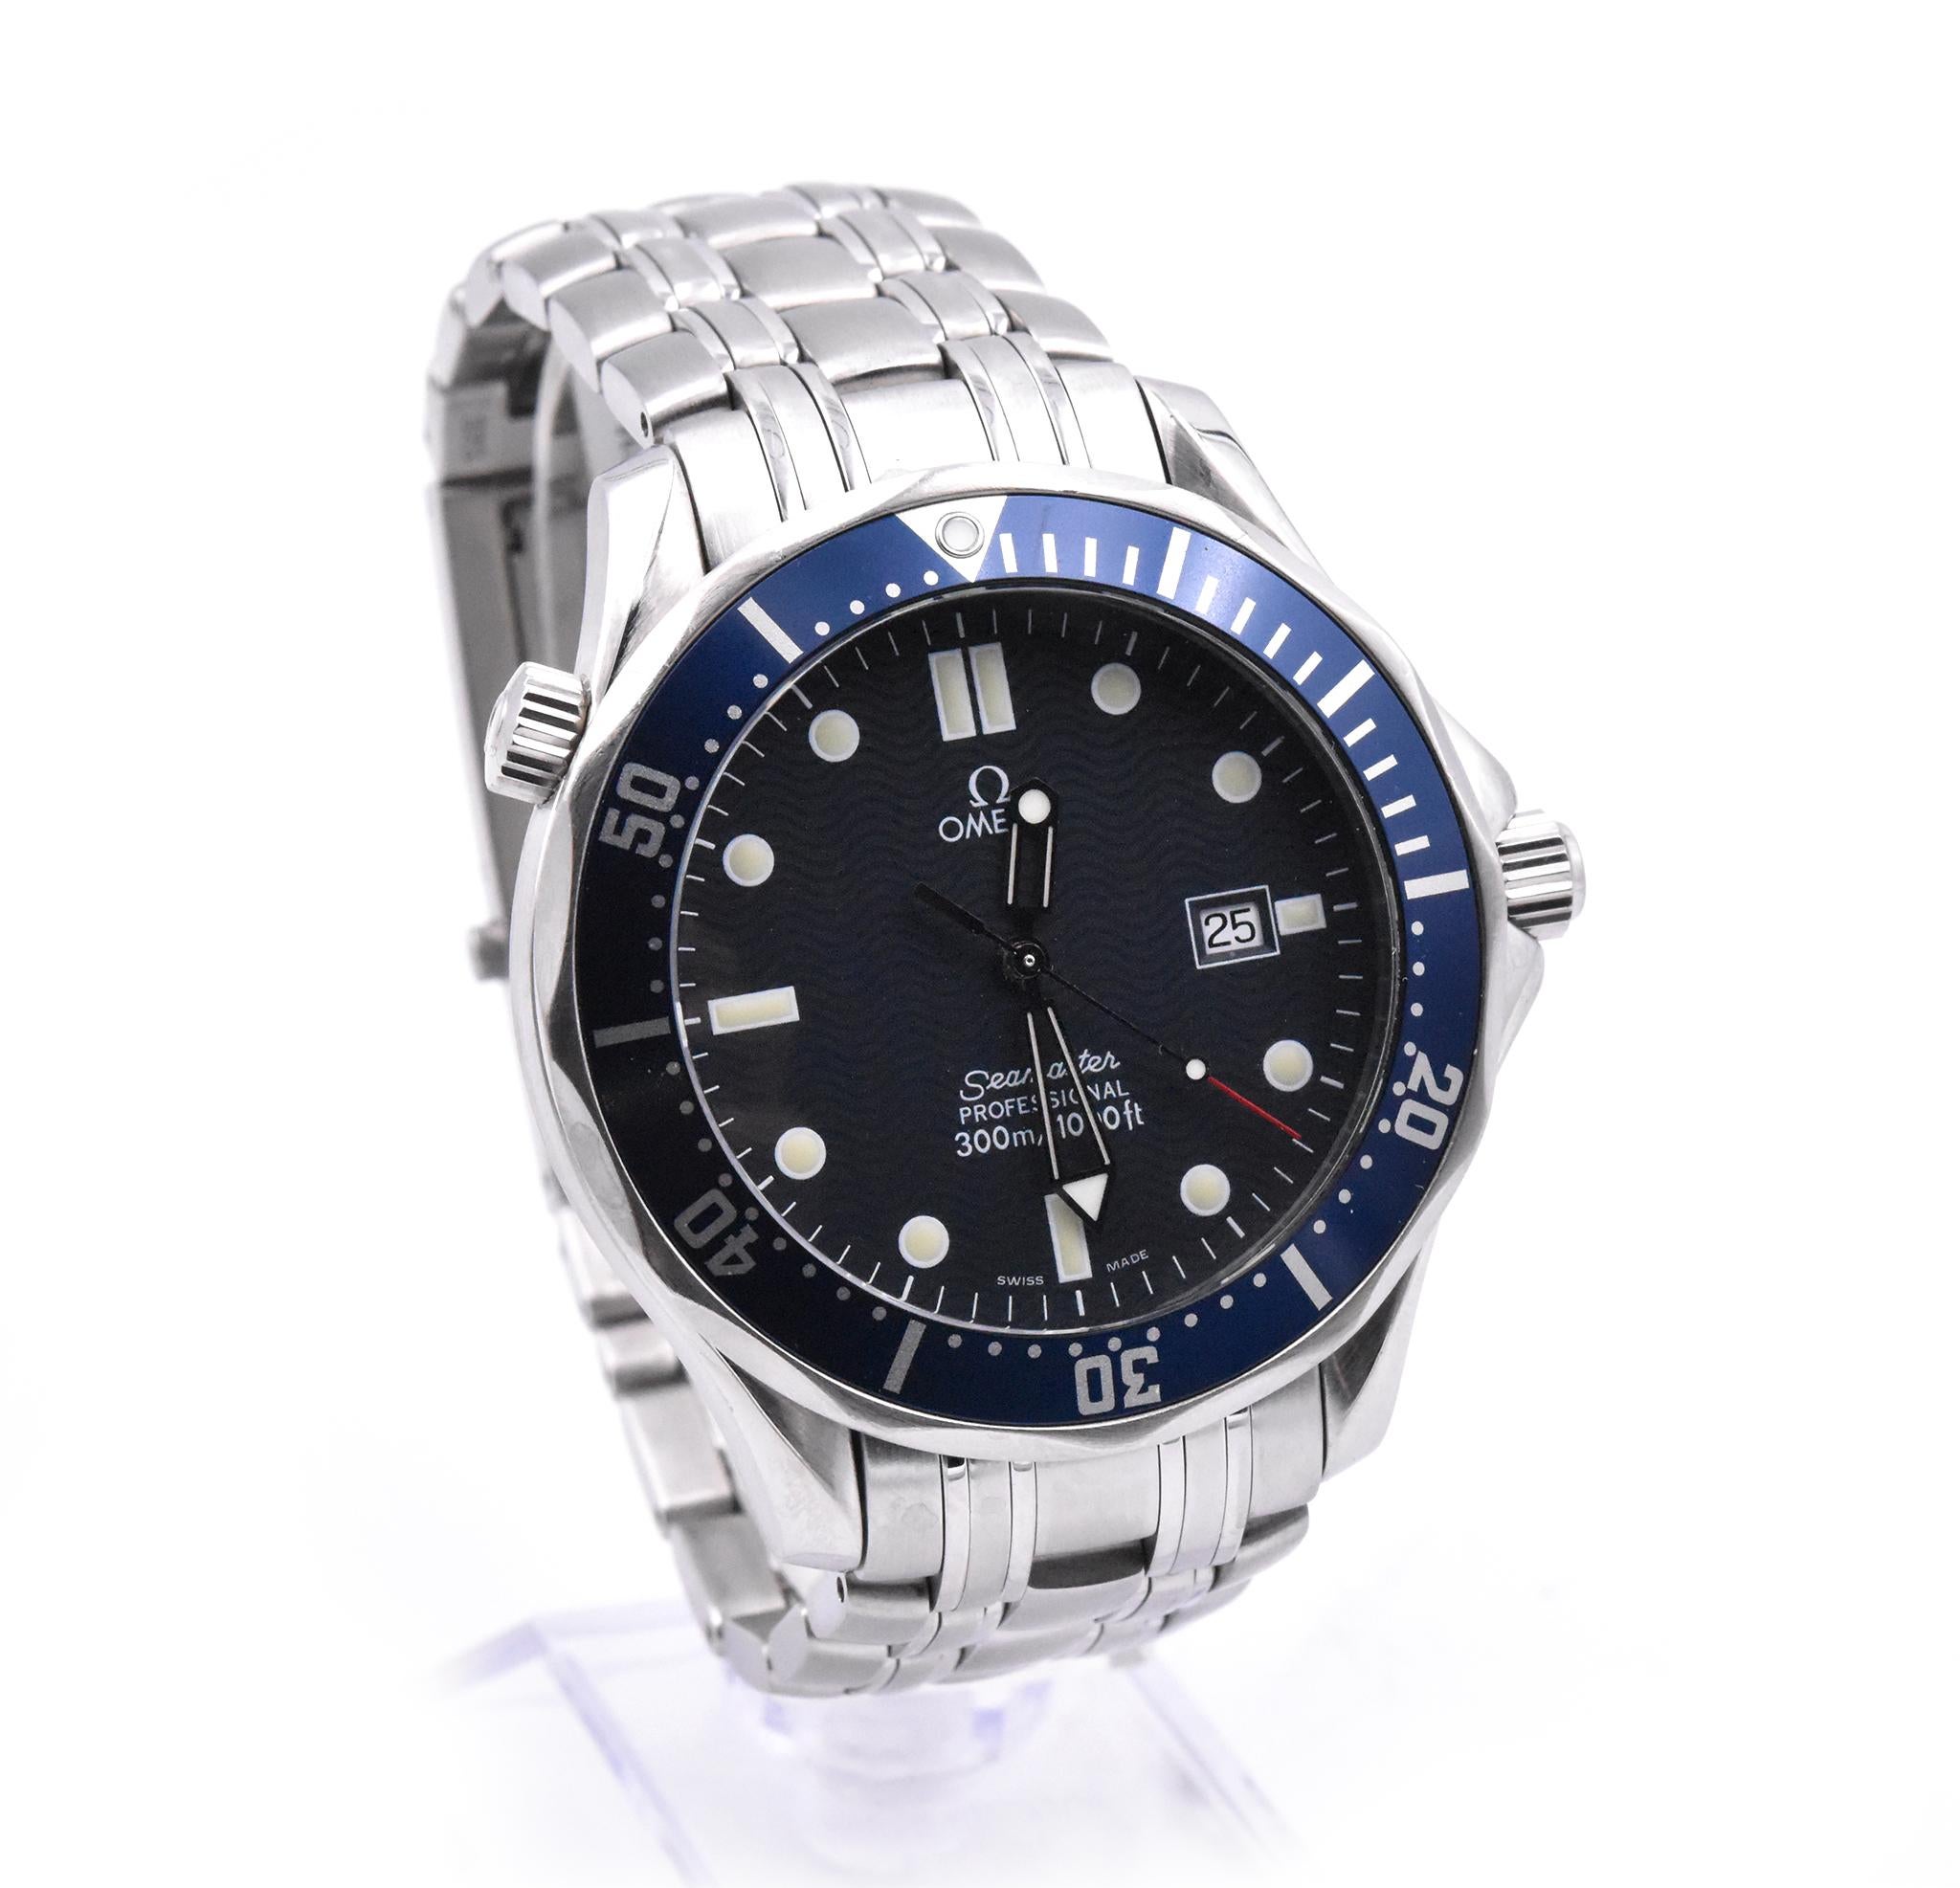 Brand: Omega
Movement: quartz
Function: hours, minutes, seconds, date
Case: 41mm case, sapphire crystal, screw down crown
Band: stainless steel bracelet with deployment clasp
Dial: blue wave dial
Reference: 212.30.41.20.03.001
Movement Serial #: